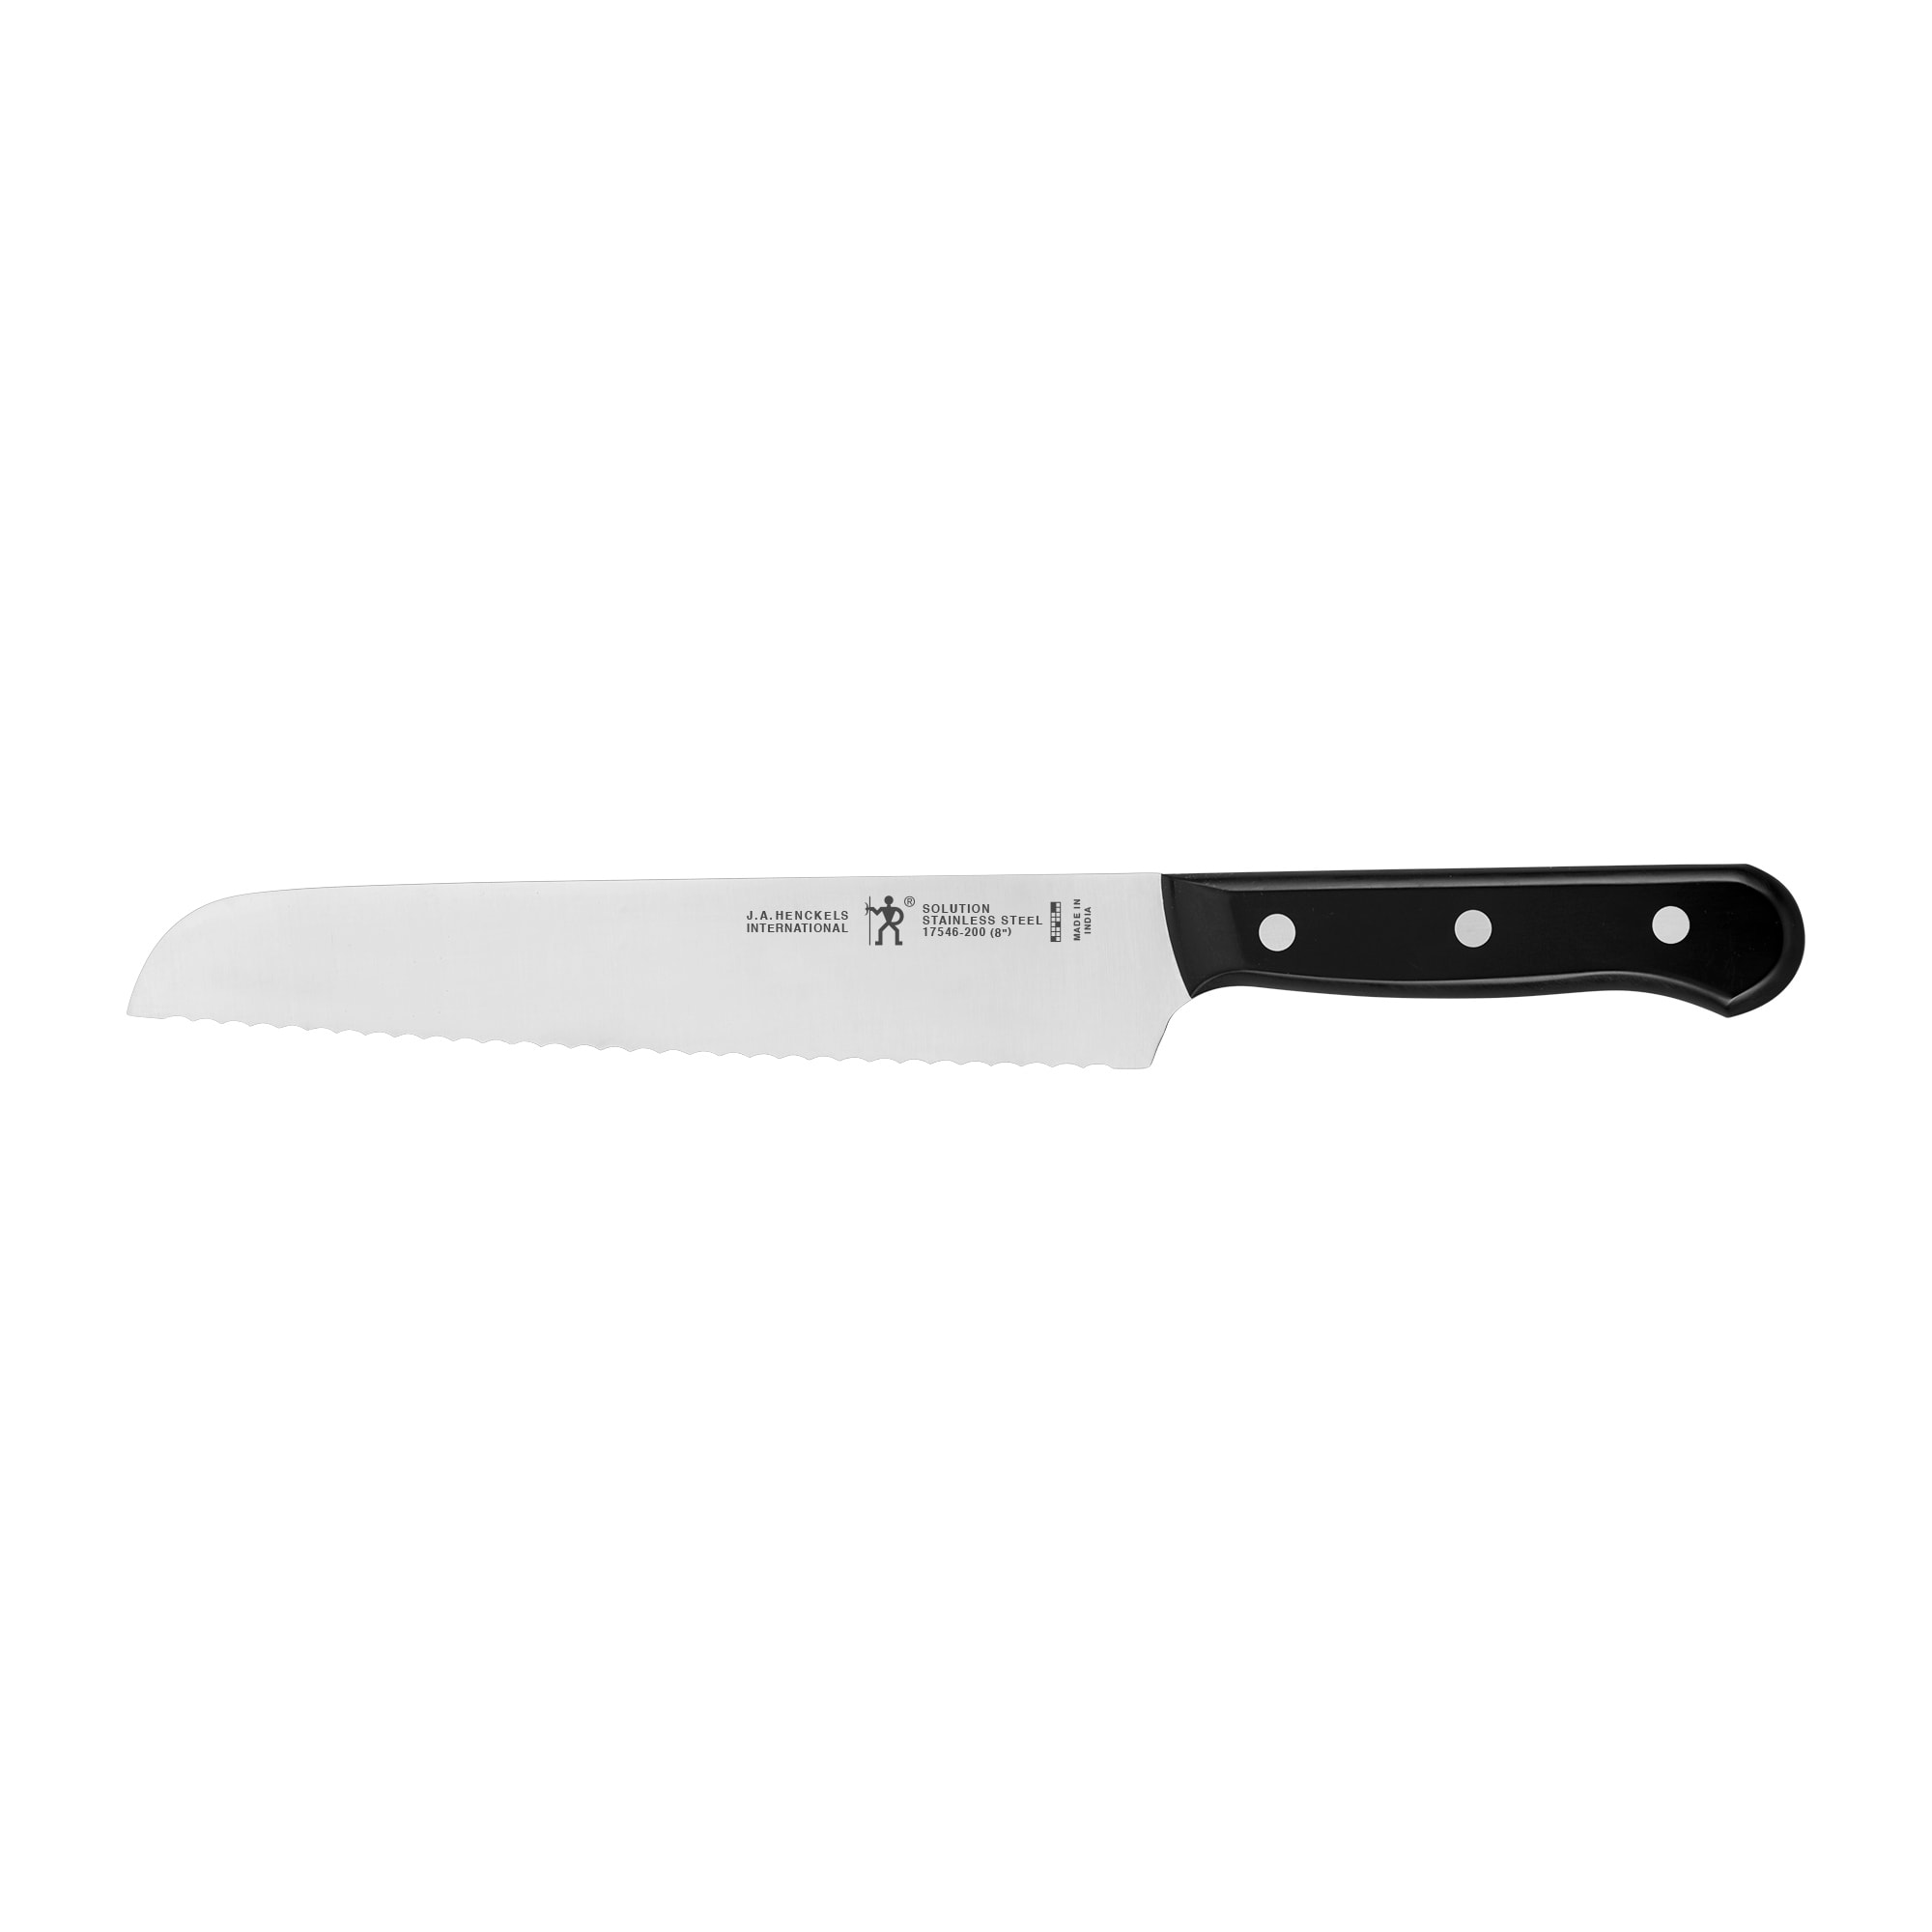 TUO 8 inch Serrated Bread Knife, Professional Bread Slicing Knife Cake Knife